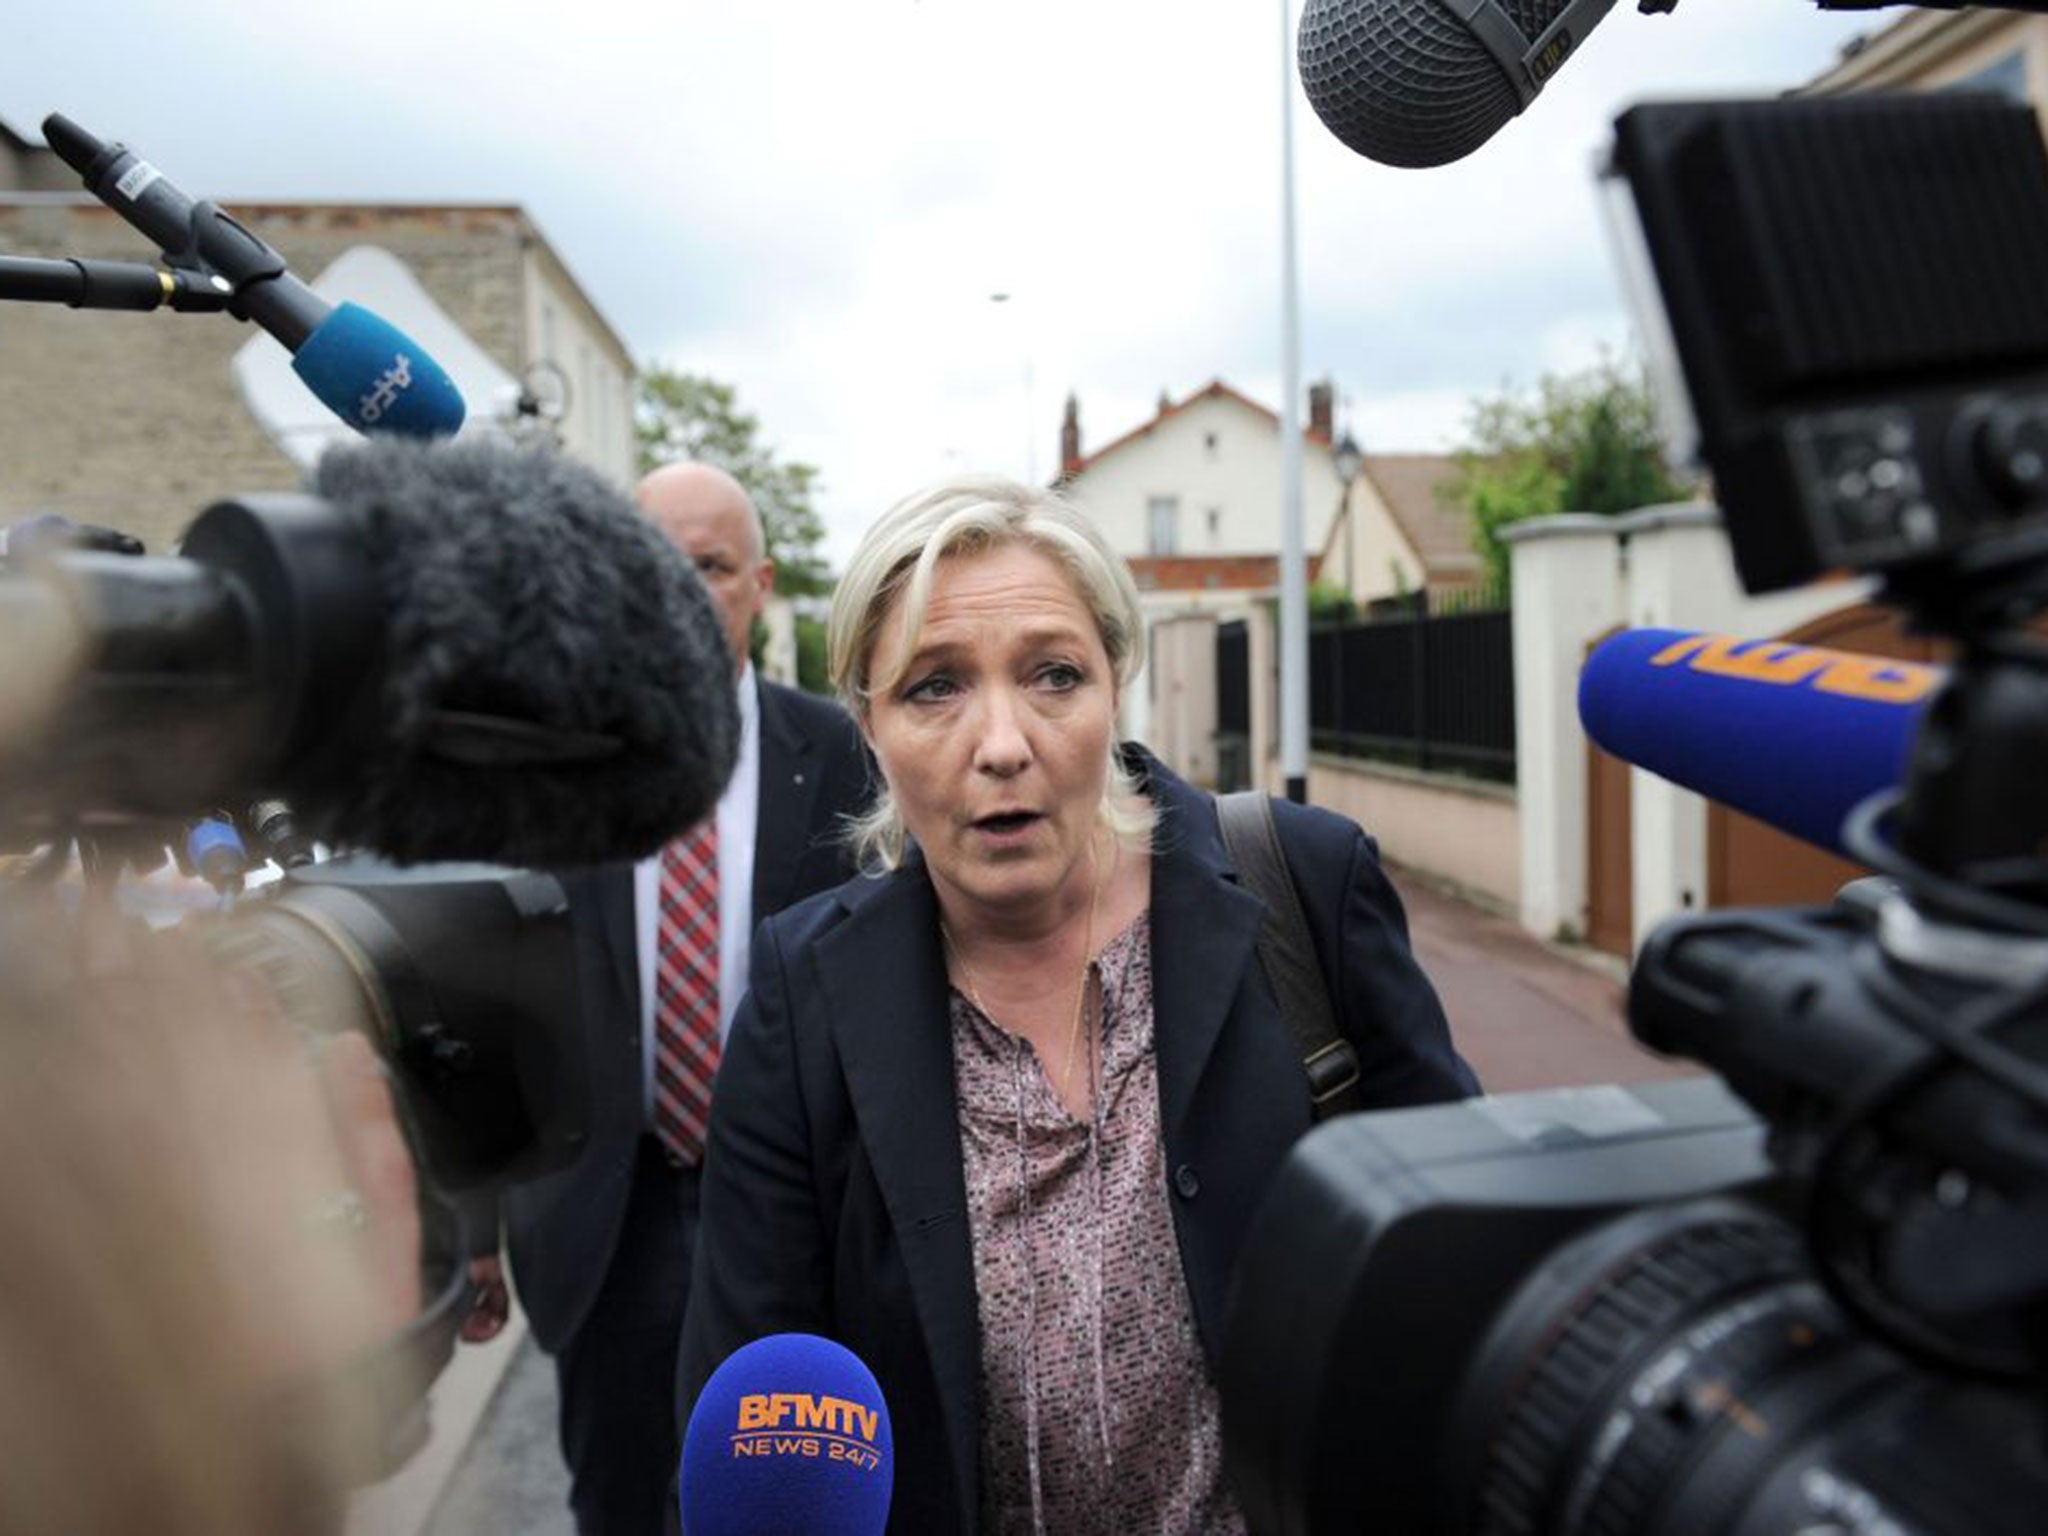 The FN president, Marine le Pen, arrives for a meeting of party leader in Nanterre